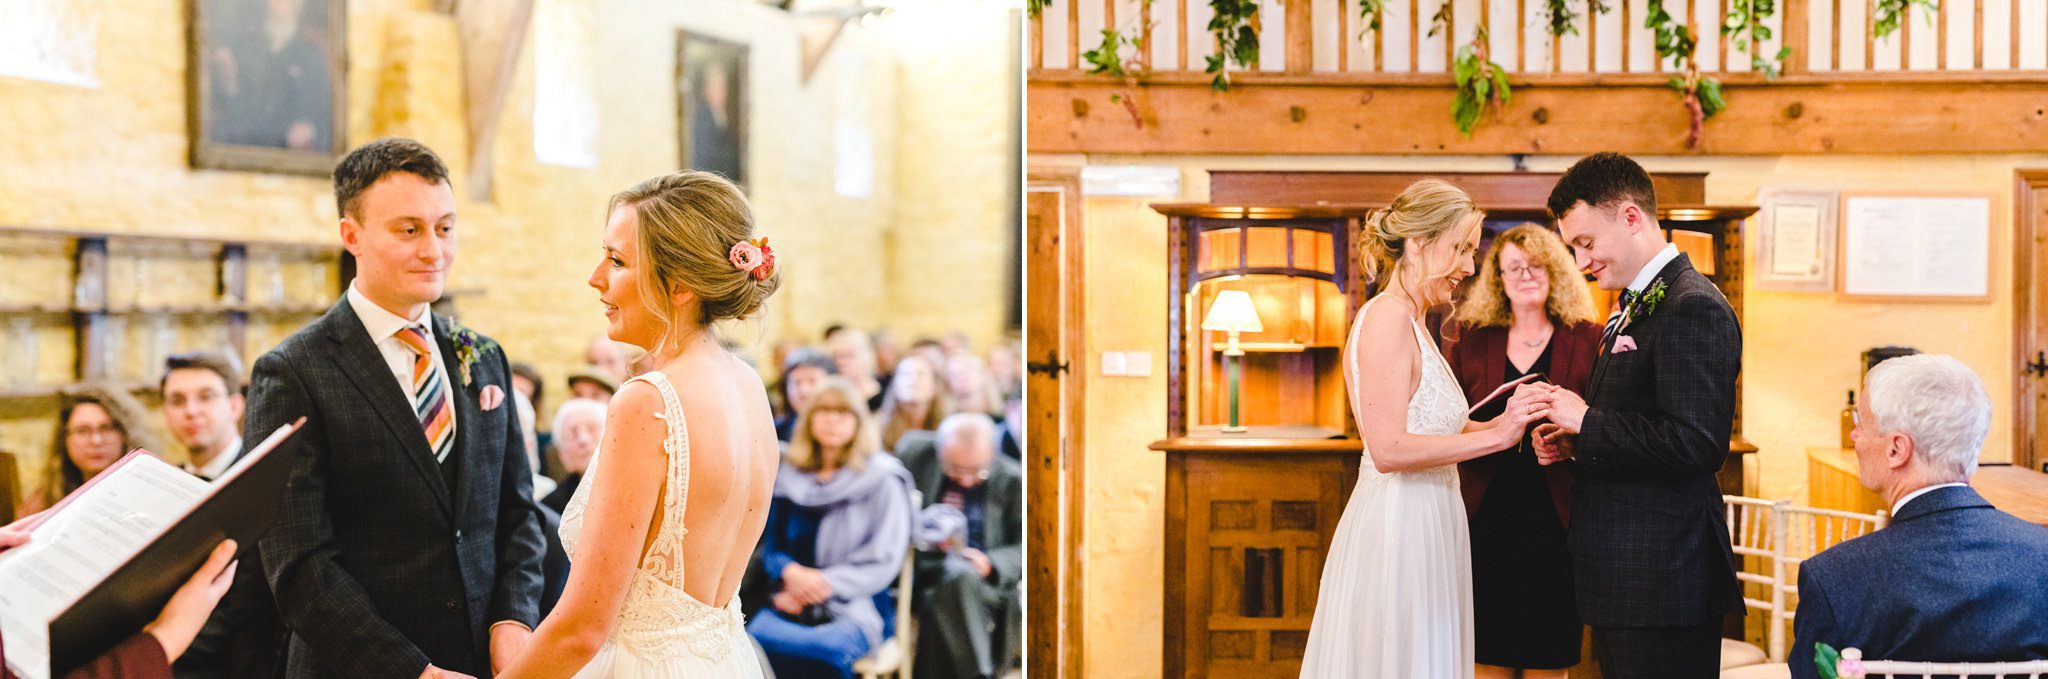 Wedding ceremony at Owlpen Manor by Bigeye Photography in the Cider Barn